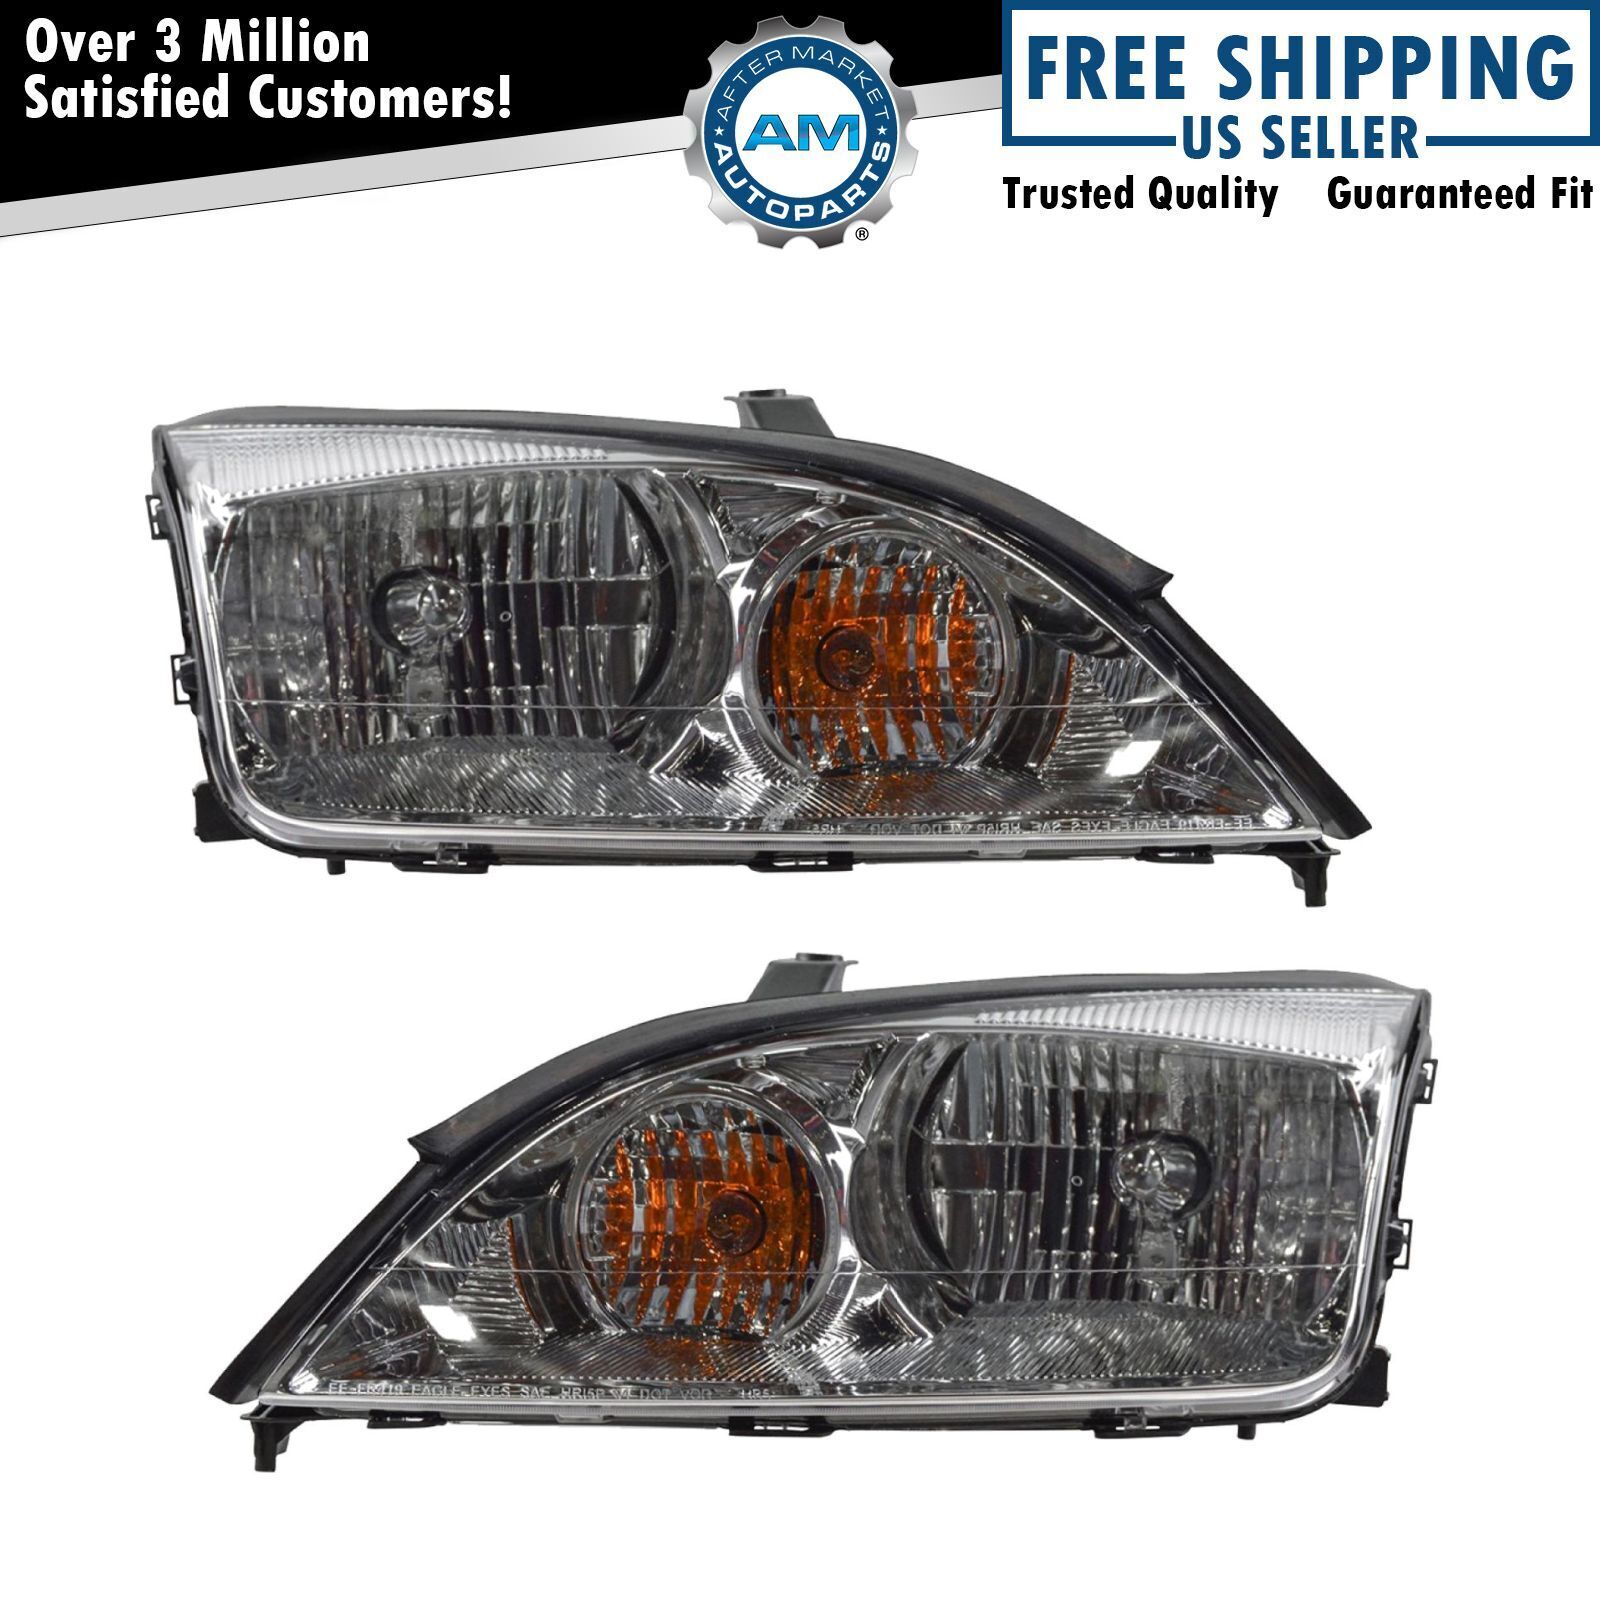 Headlight Set Left & Right Halogen For 2005-2007 Ford Focus FO2502210 FO2503210